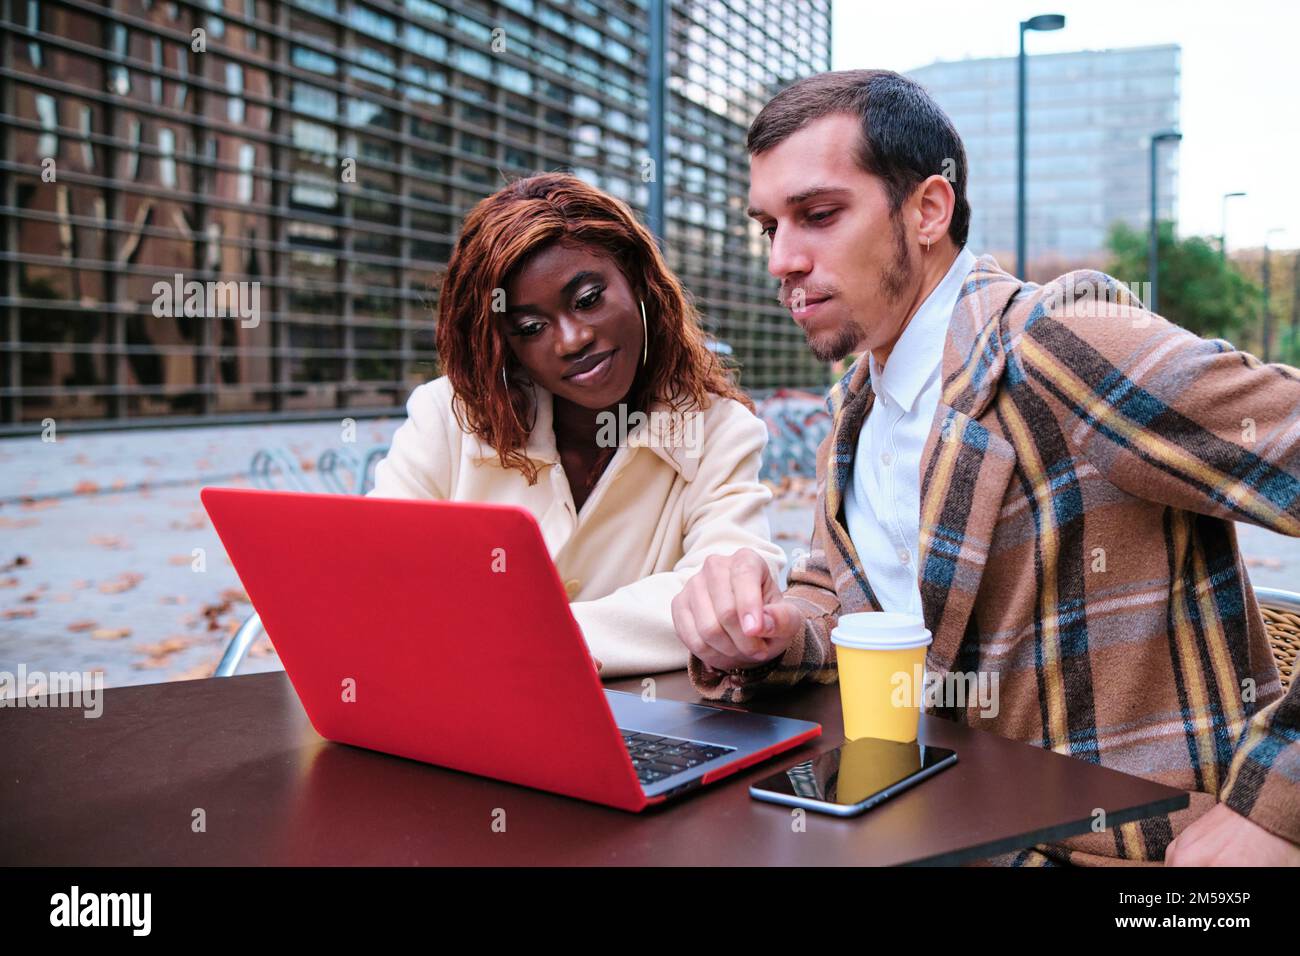 Two business people working together on a laptop while sitting at an outdoor cafe. Stock Photo